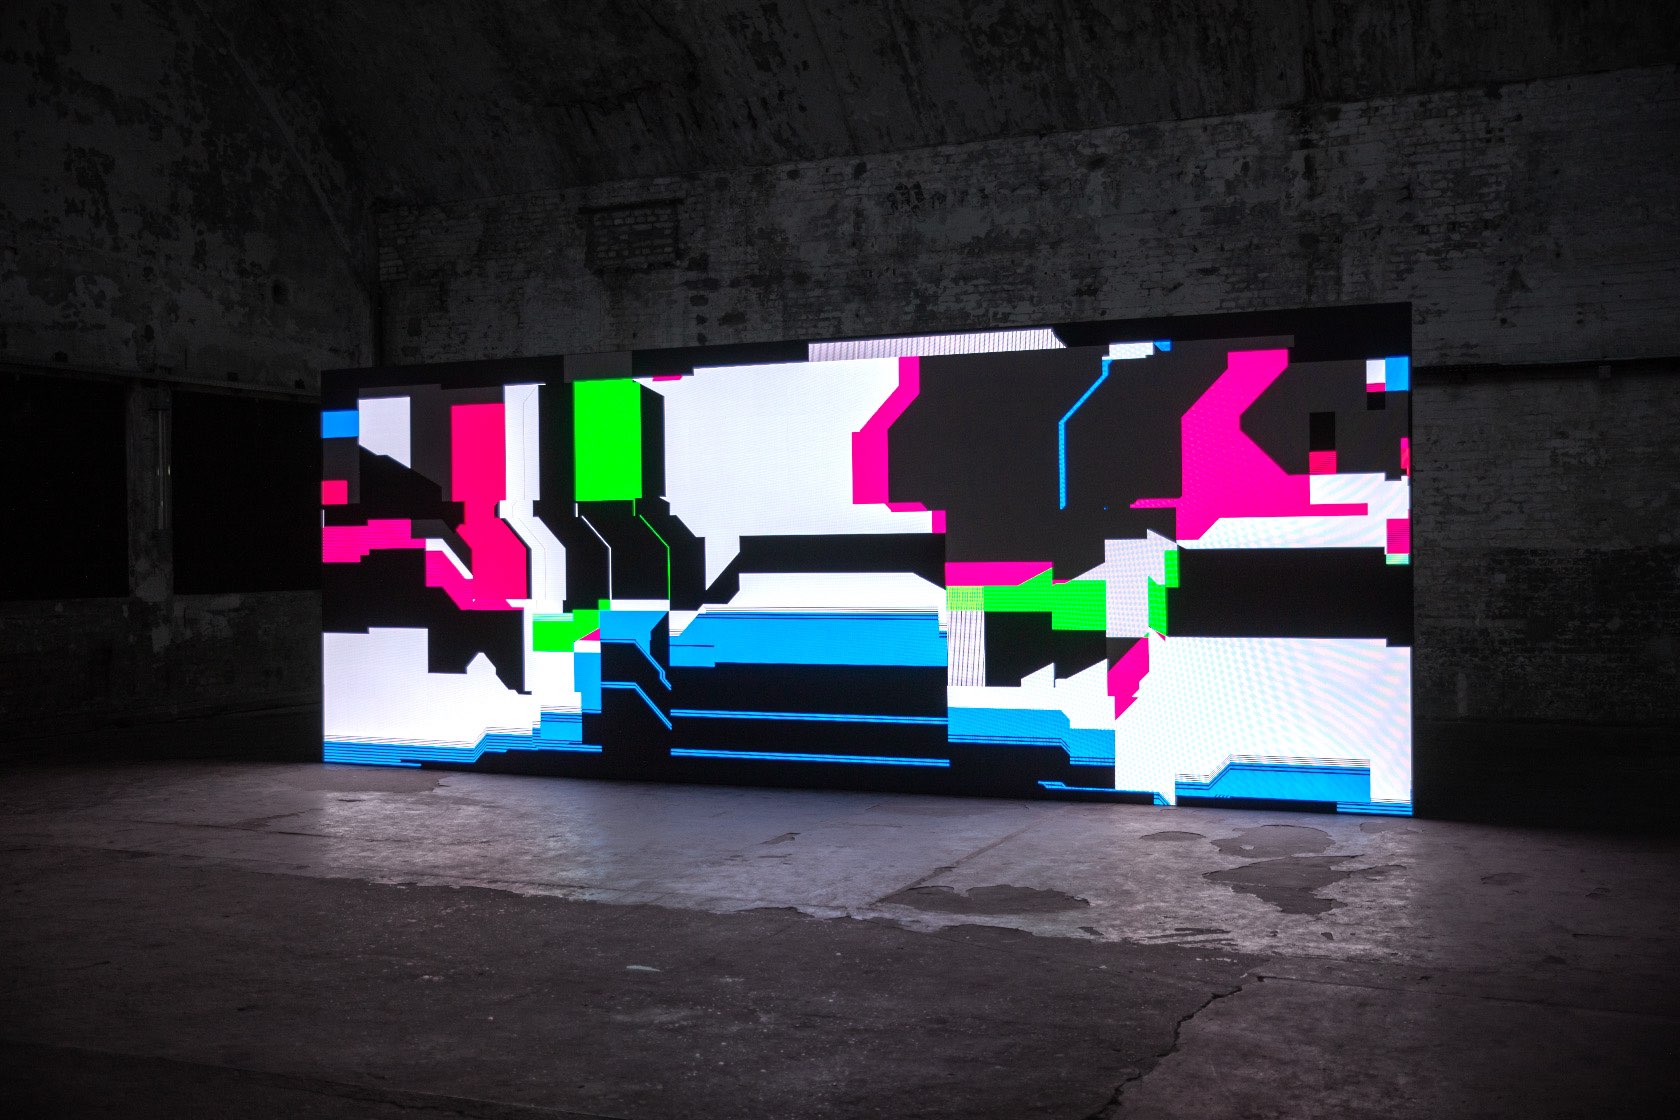 A digital work with shifting fields of white, black, pink, blue, and green is displayed on a large screen in a bare, concrete room